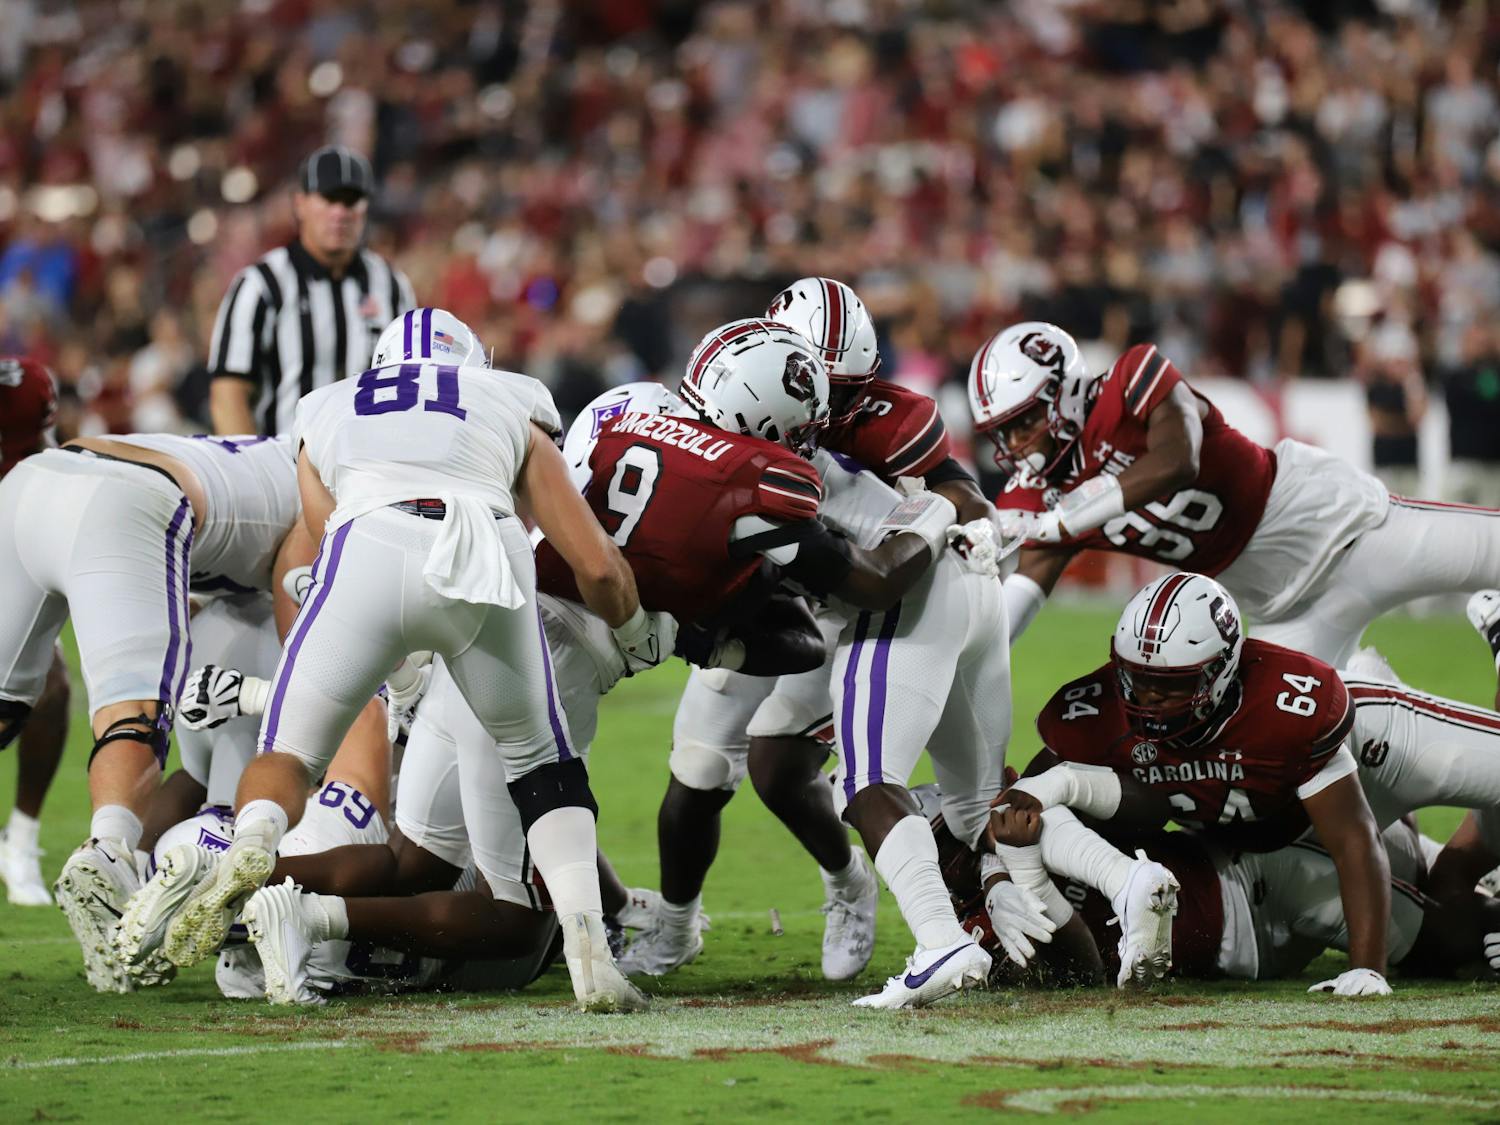 A group of South Carolina defenders, including freshmen linebackers Desmond Umeozulu and Grayson "Pup" Howard, swarm to one of Furman's running backs in the third quarter. Both young Gamecocks got their first significant action in the game and combined for seven total tackles.